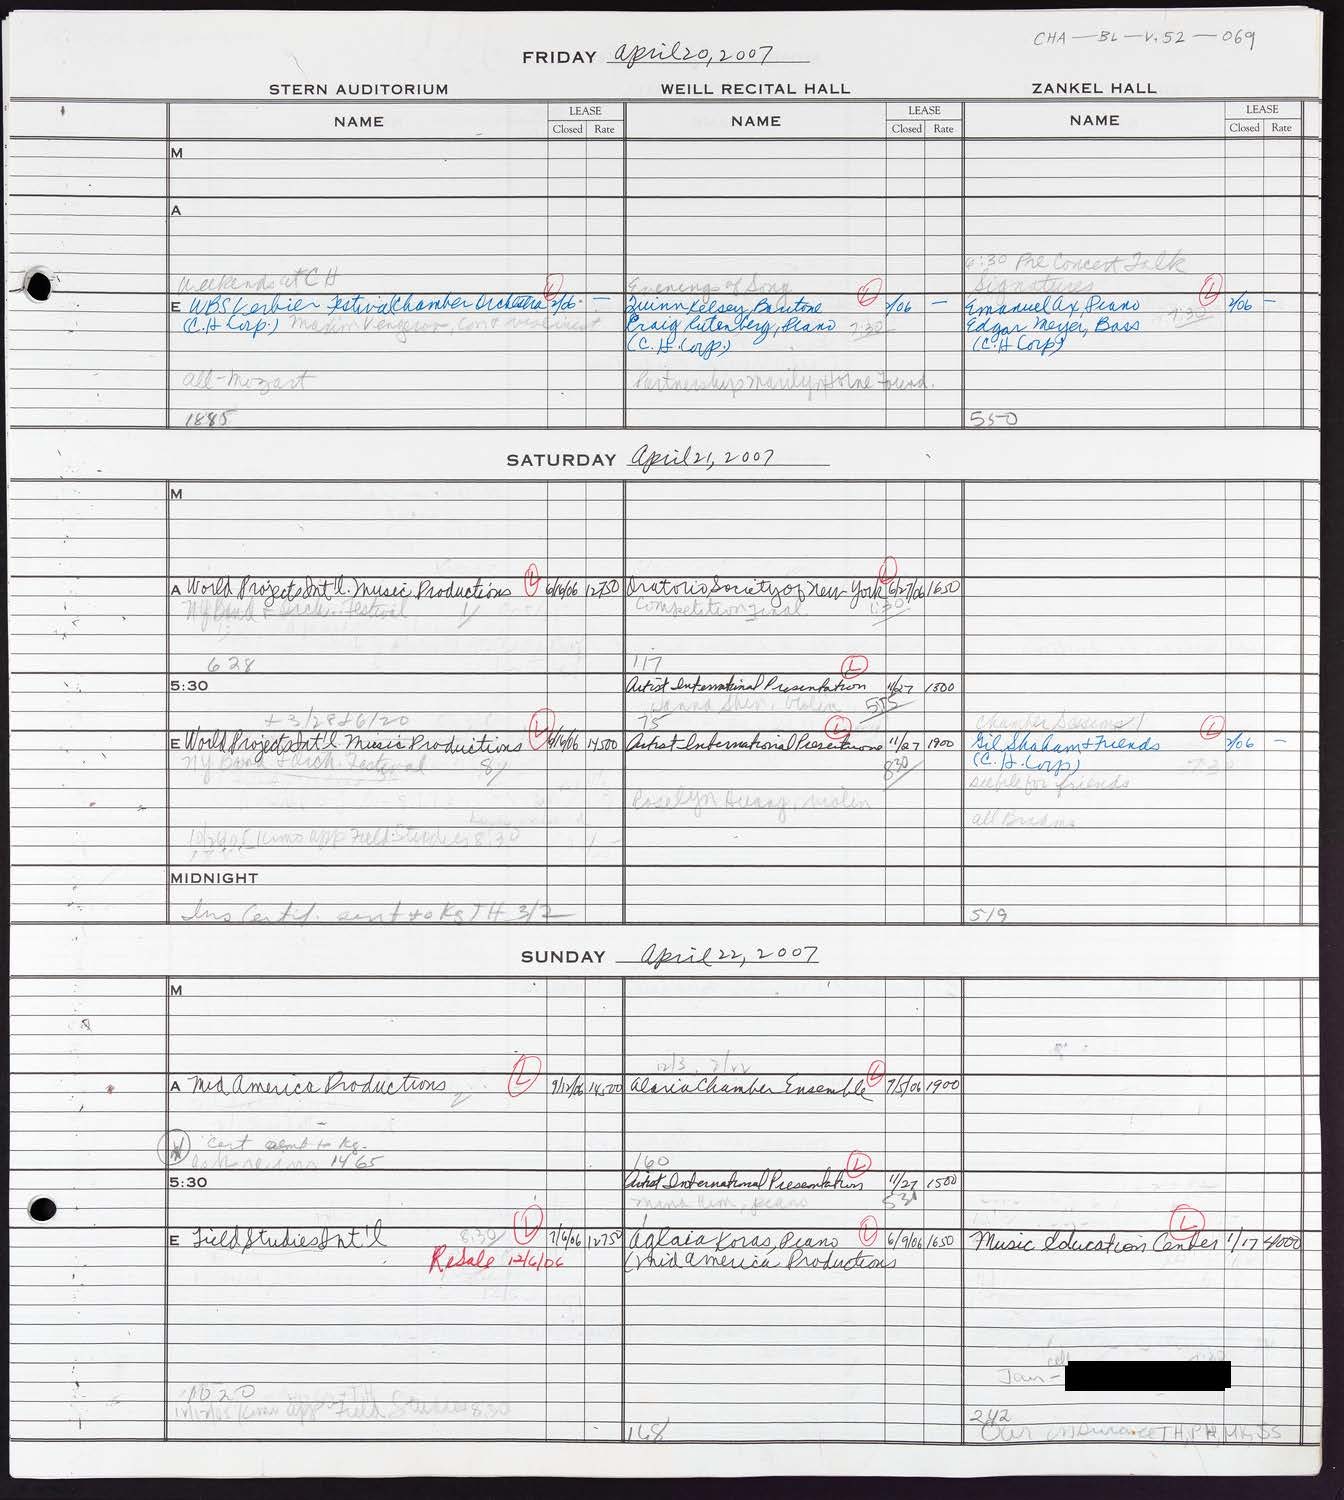 Carnegie Hall Booking Ledger, volume 52, page 69